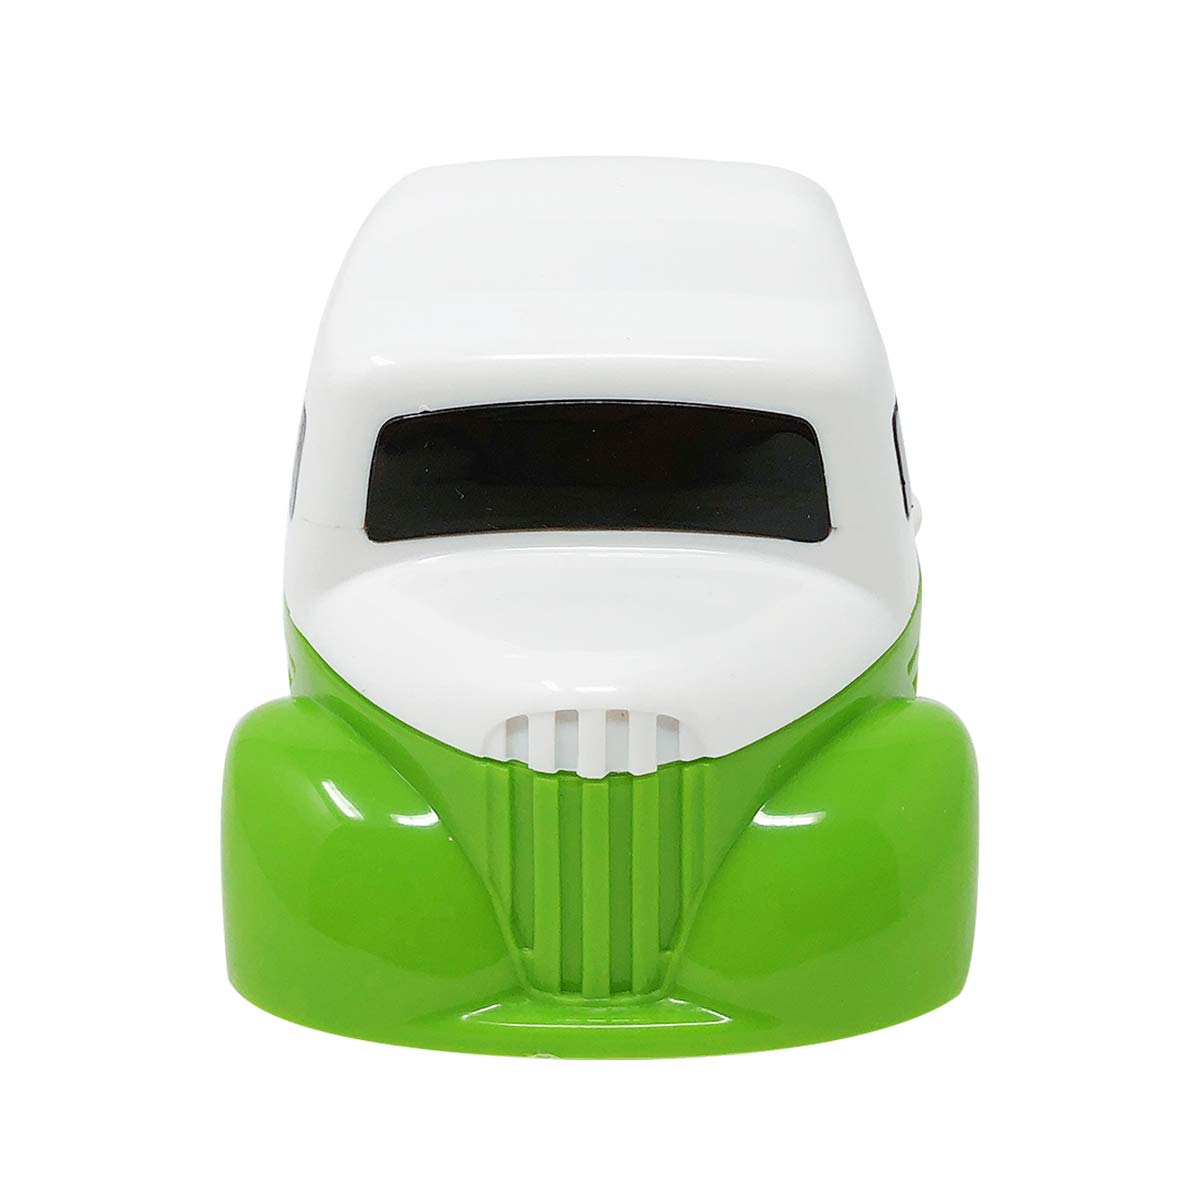 allydrew Cute Portable Mini Vacuum Cleaner for Home and Office, Green Truck